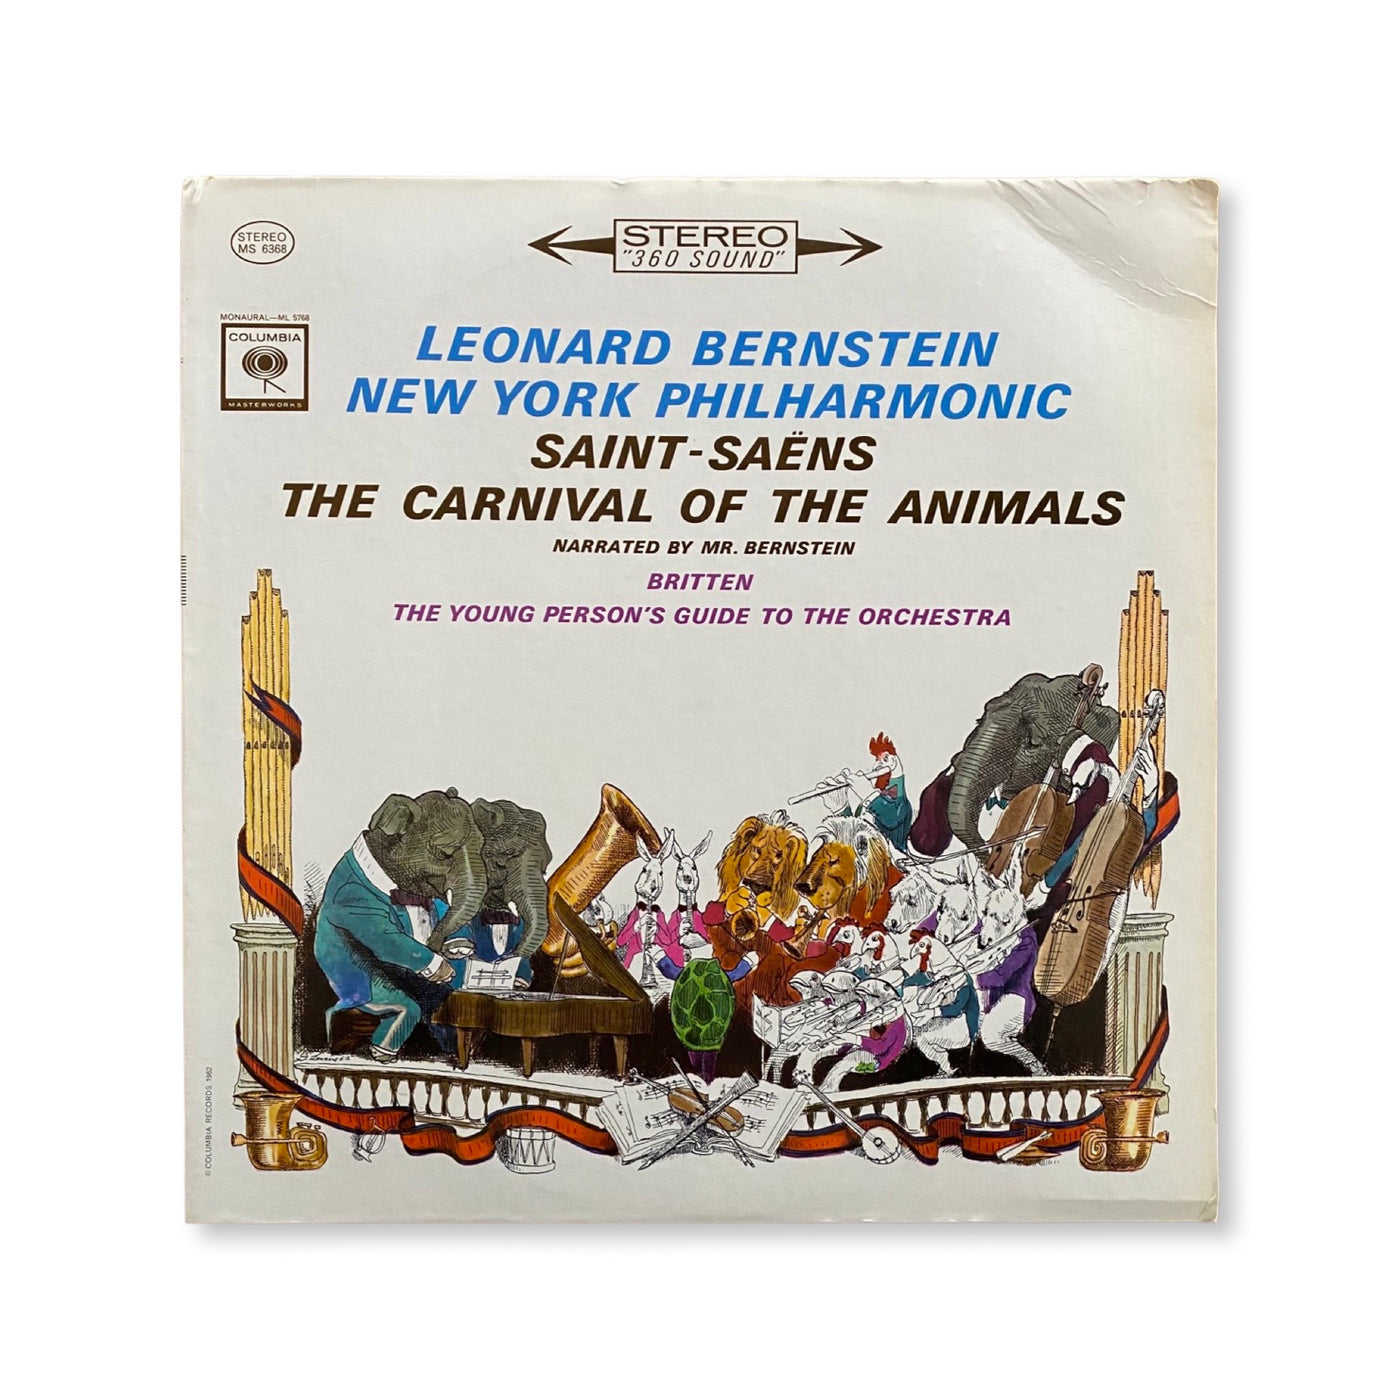 Leonard Bernstein, The New York Philharmonic Orchestra / Camille Saint-Saëns / Benjamin Britten - The Carnival Of The Animals / The Young Person's Guide To The Orchestra